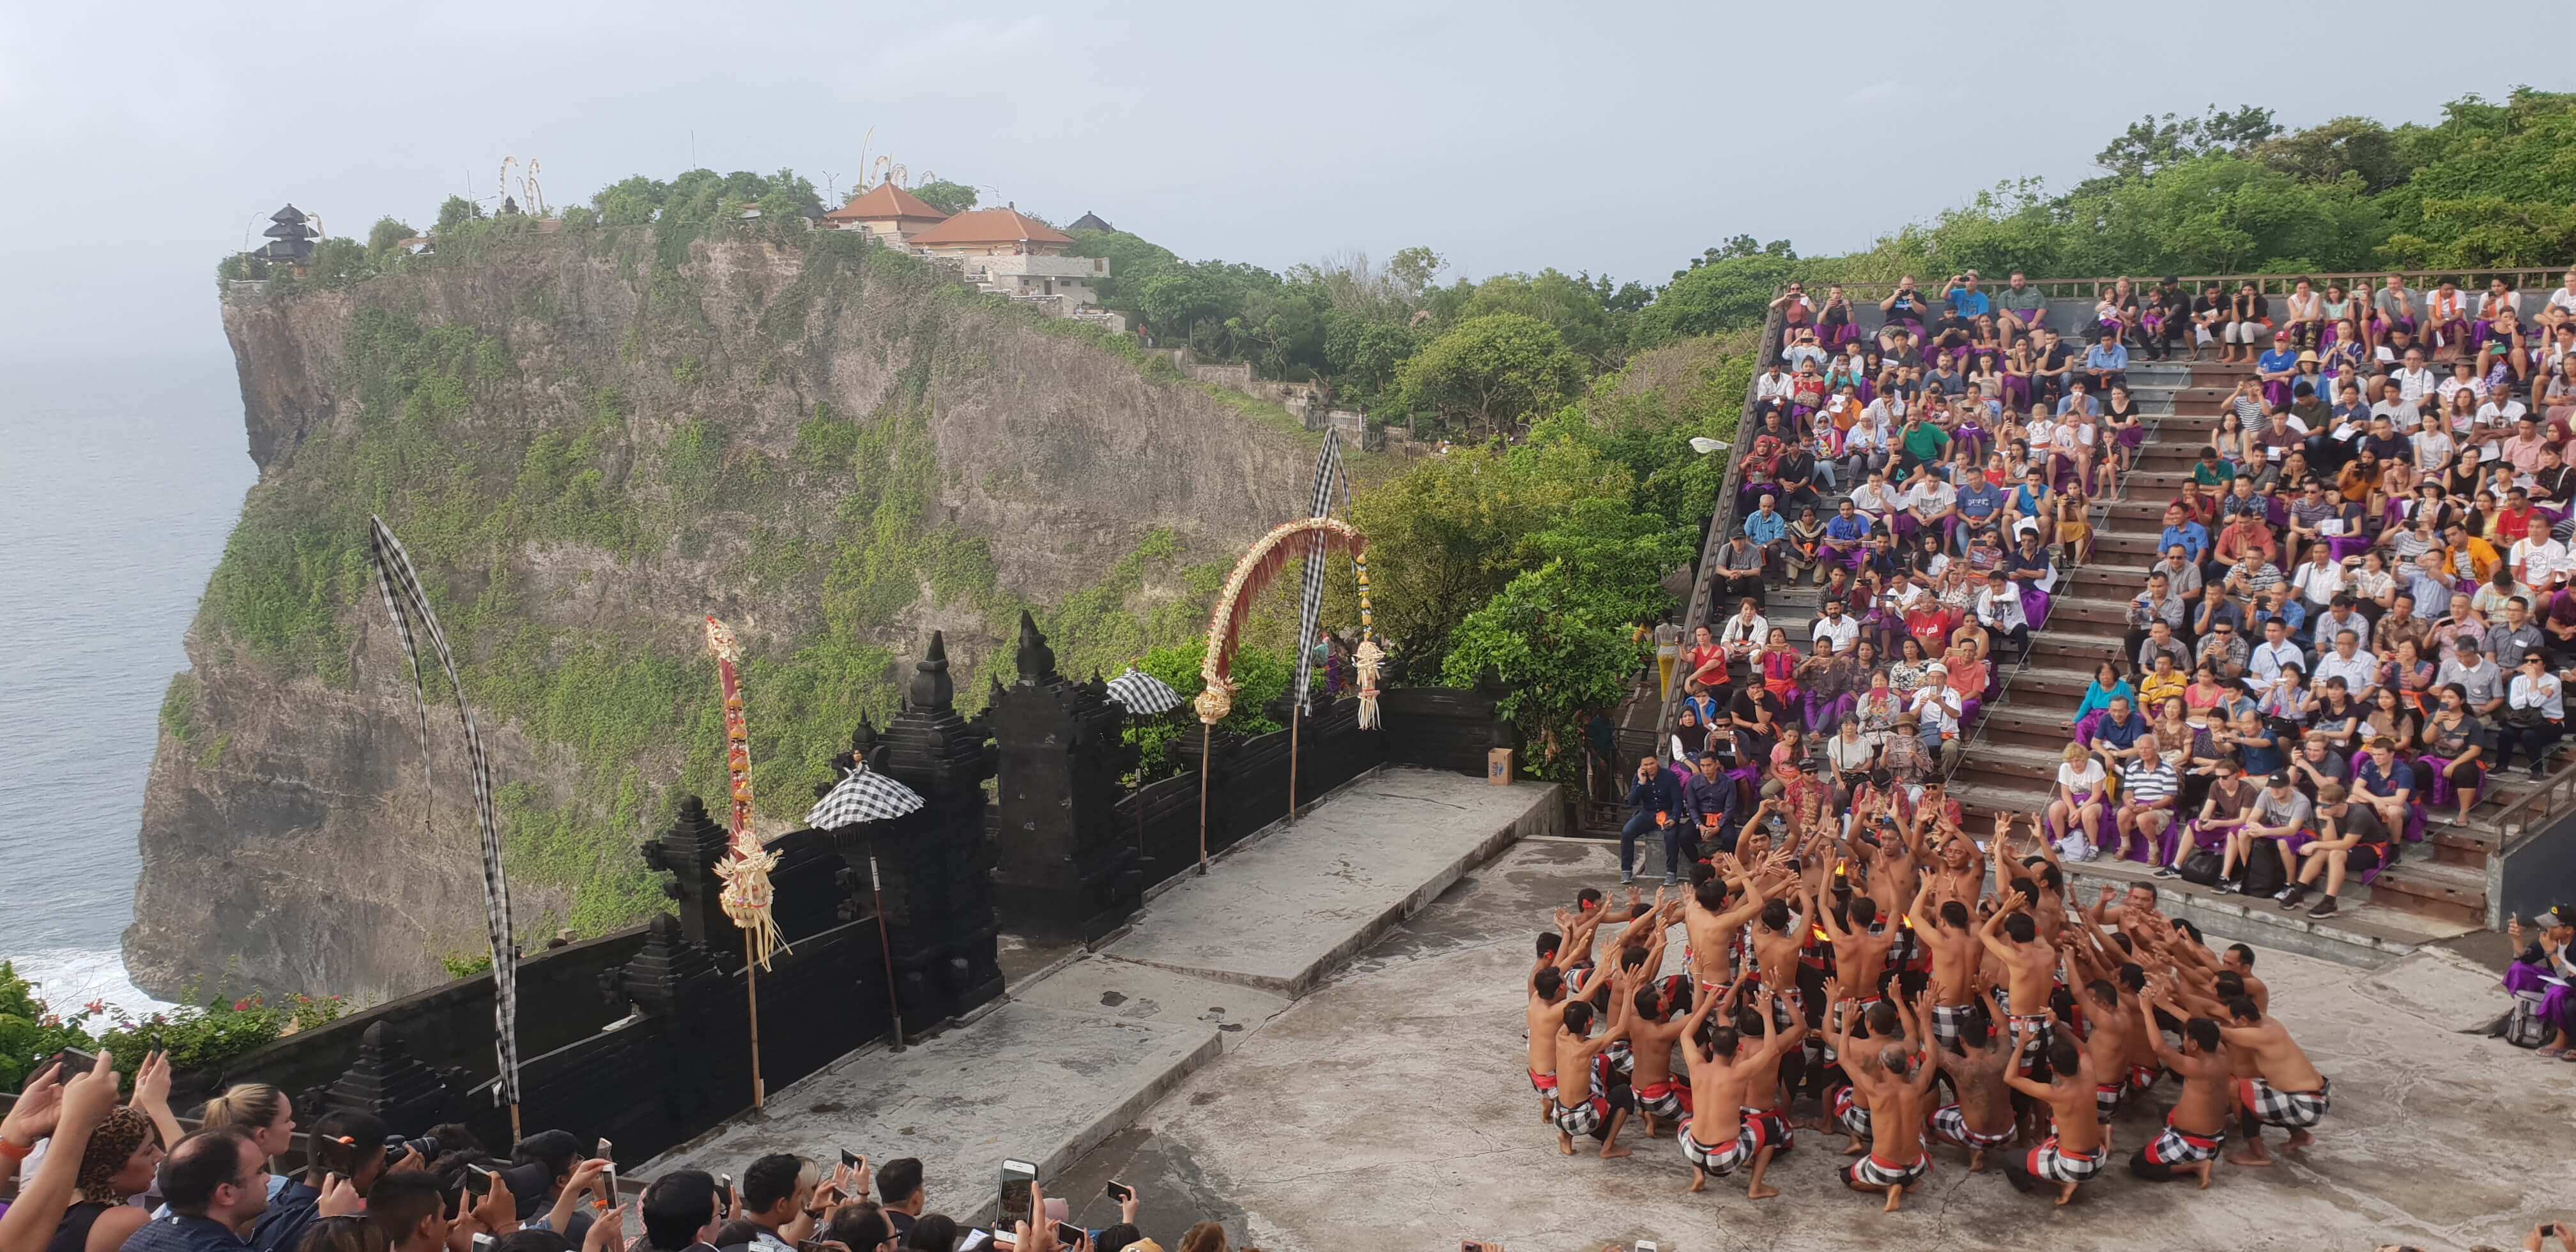 Kecak Fire Dance is a program that will give you an insight into the culture of Uluwatu